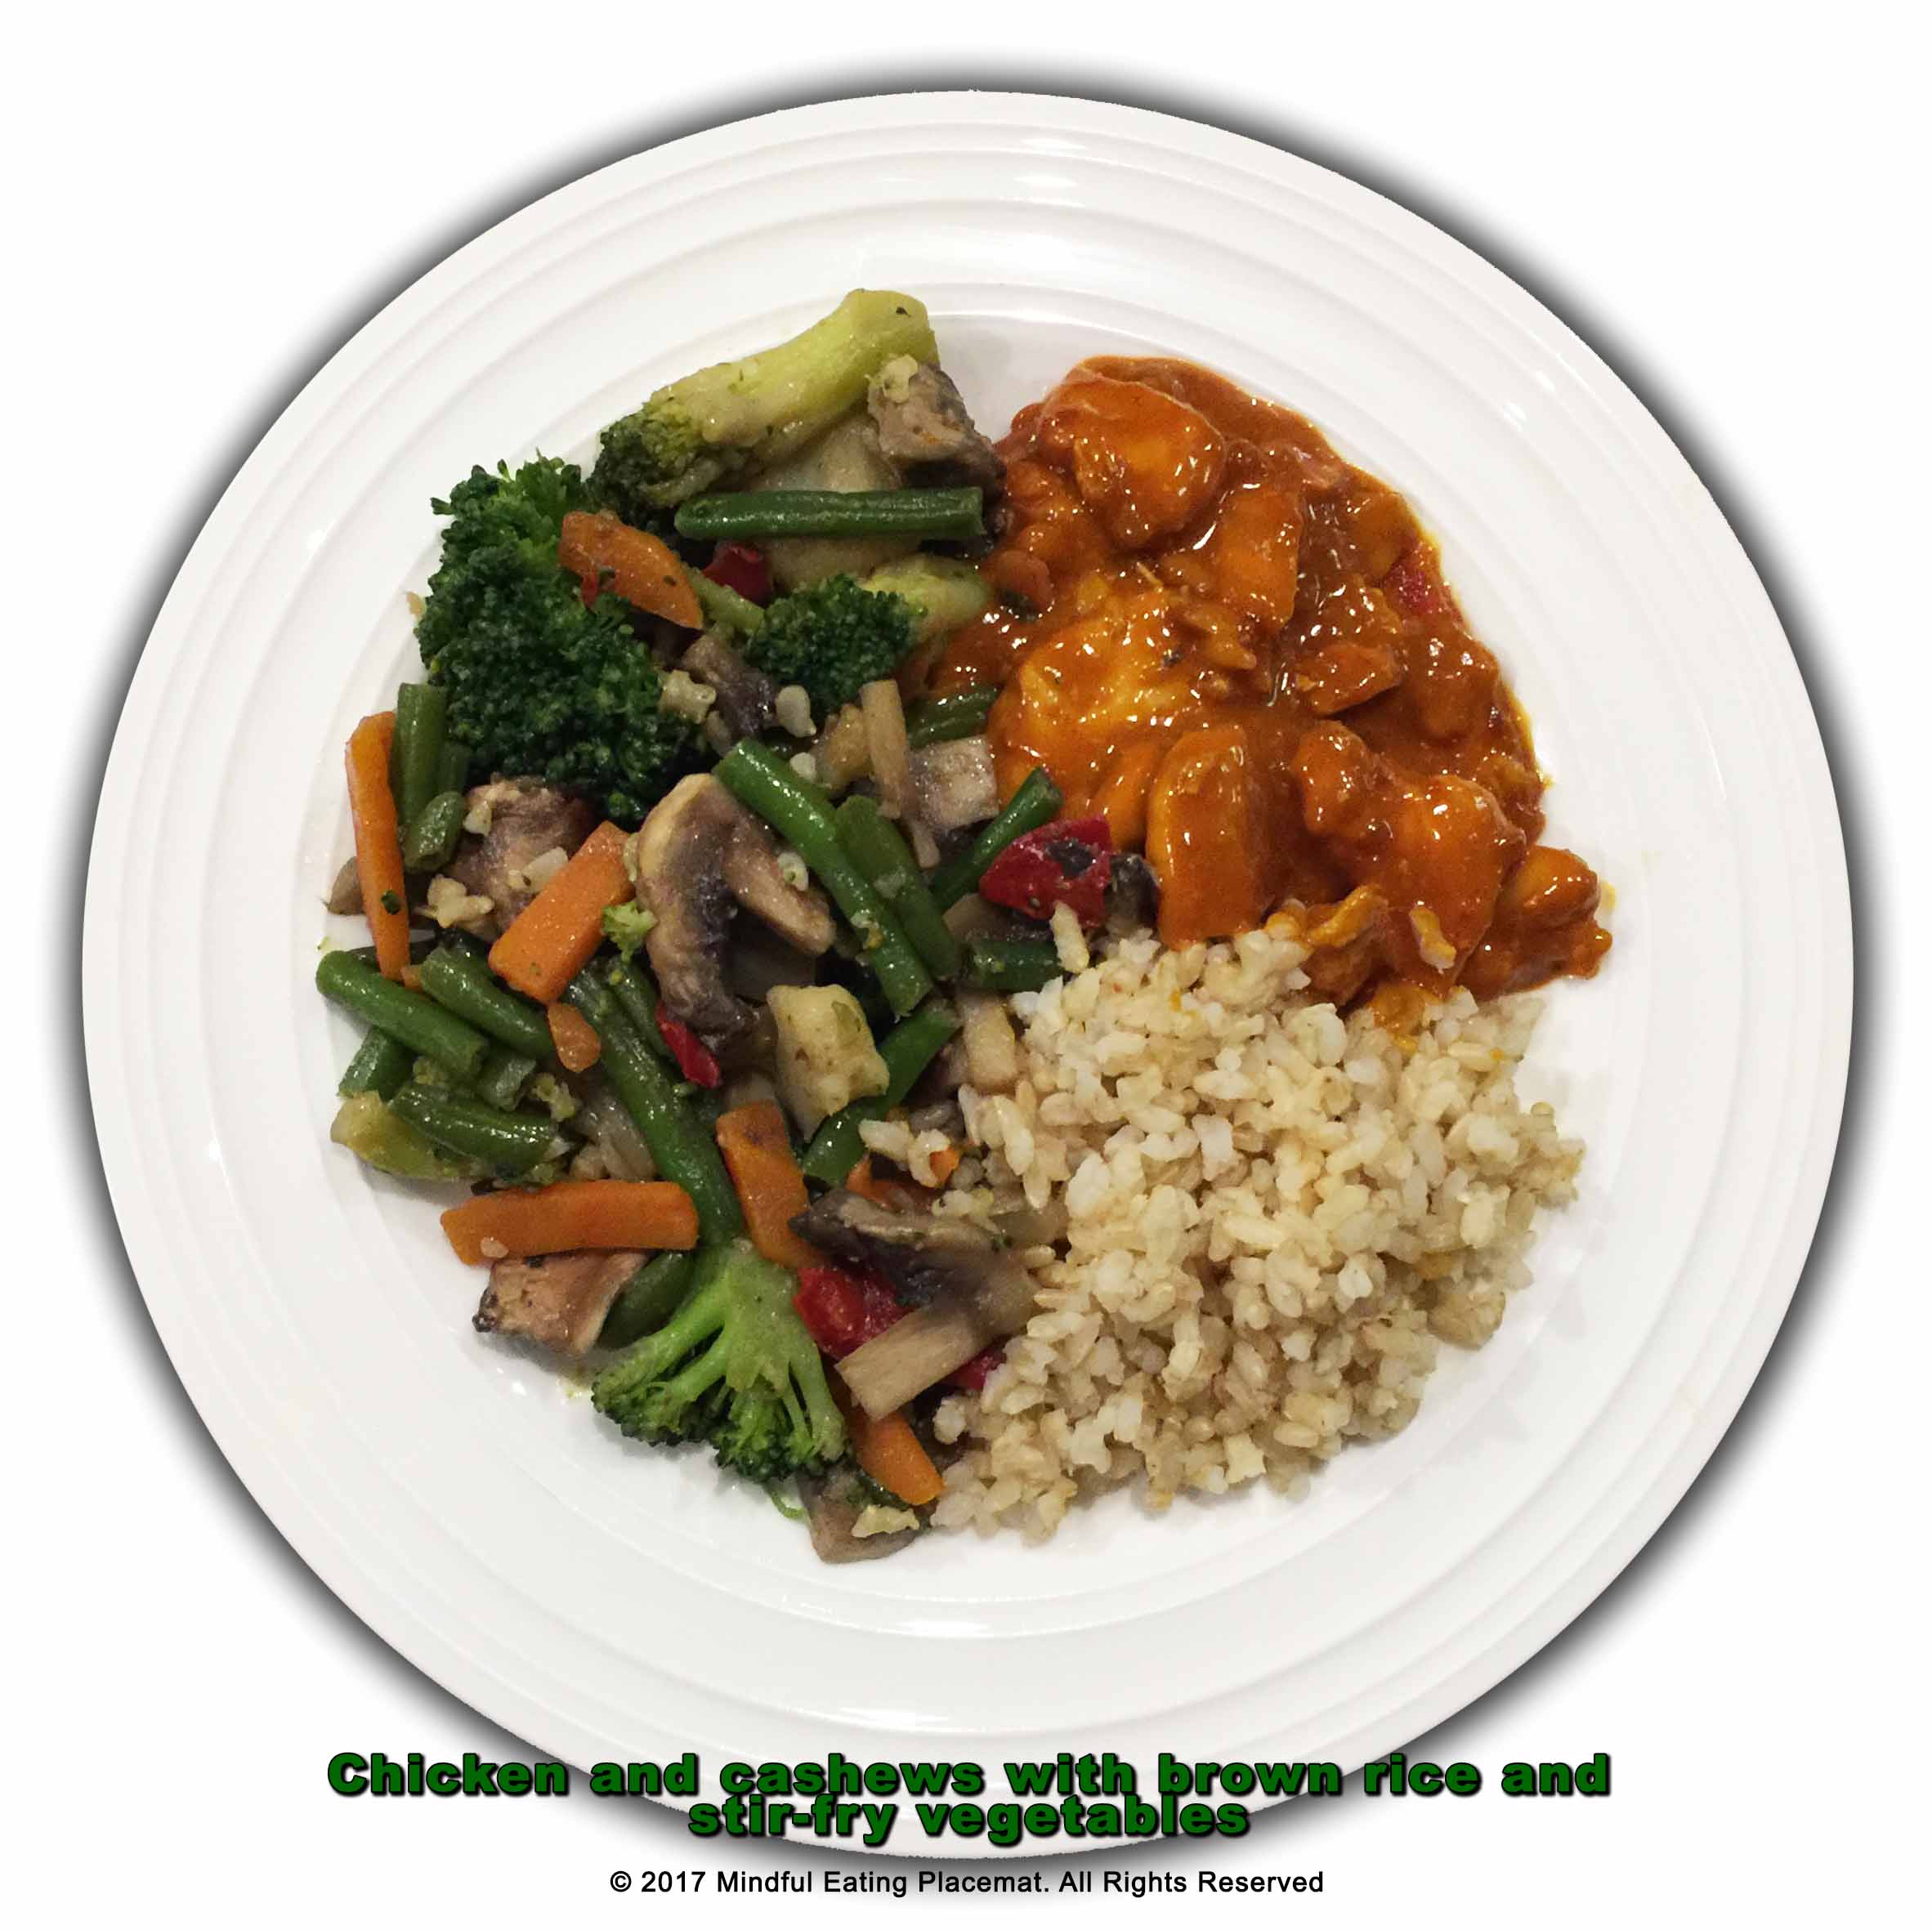 Chicken and cashews with brown rice and stir-fry vegetables